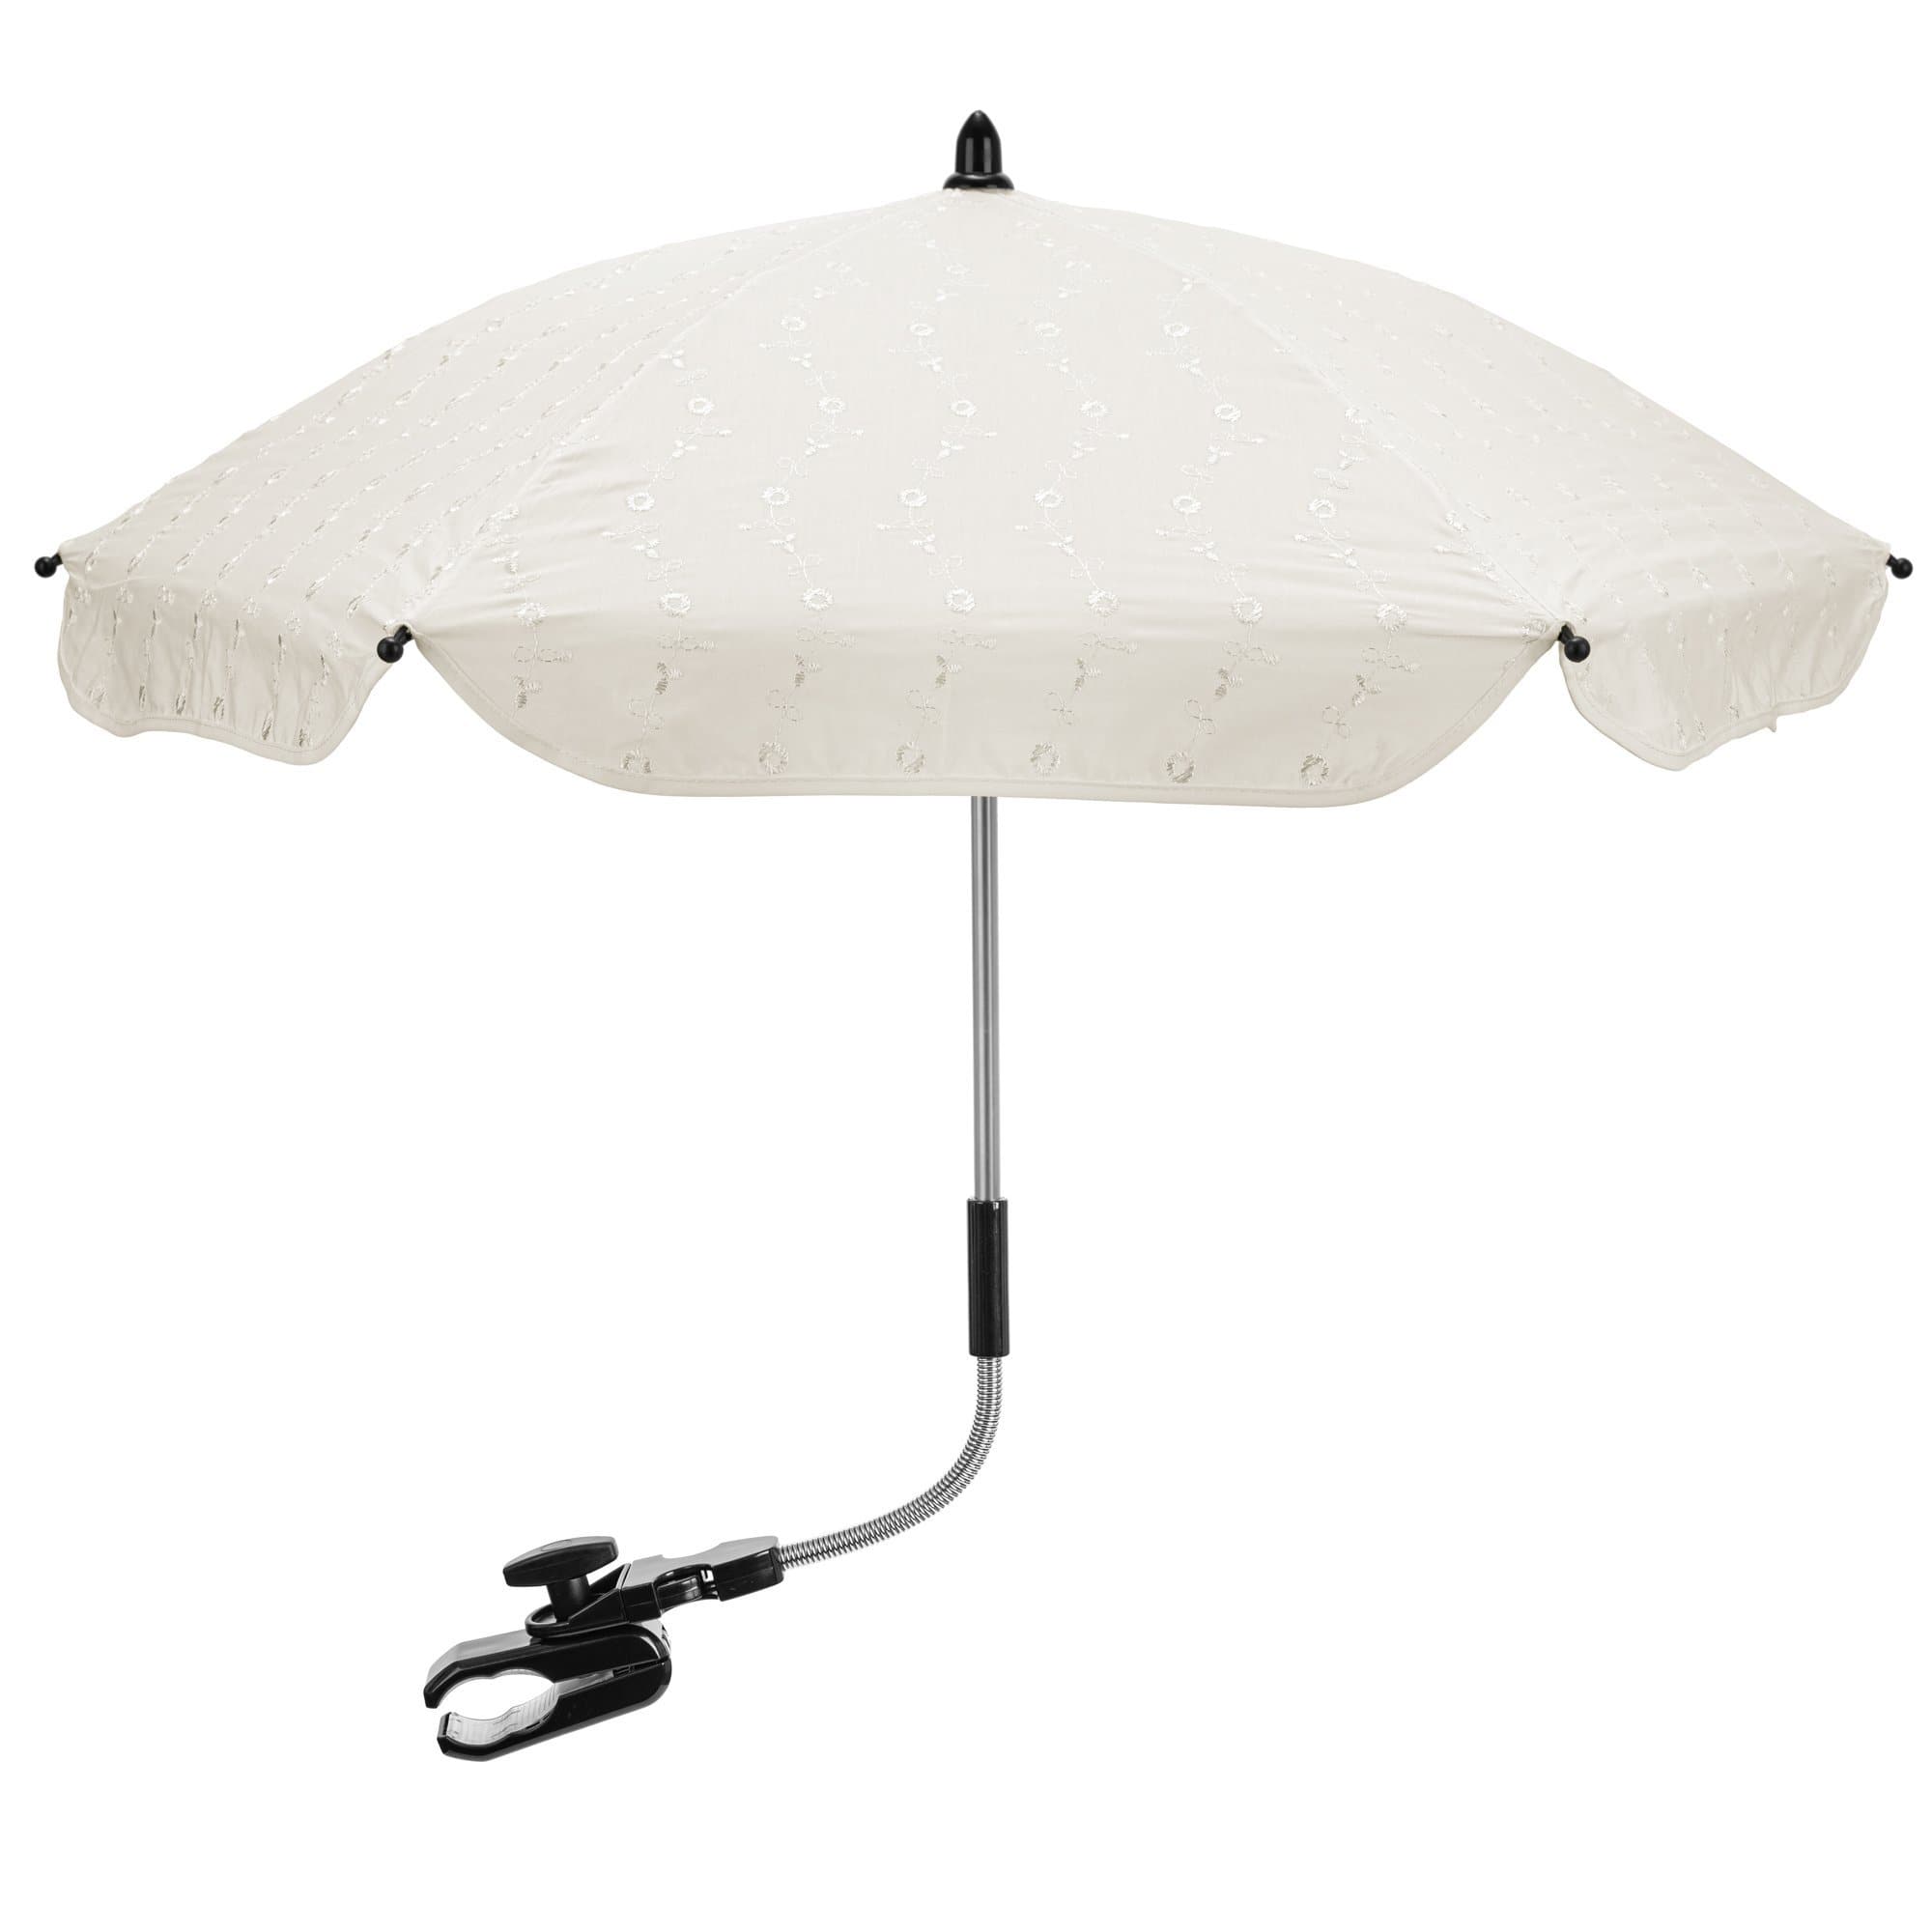 Broderie Anglaise Parasol Compatible with Bebecar - Cream / Fits All Models | For Your Little One